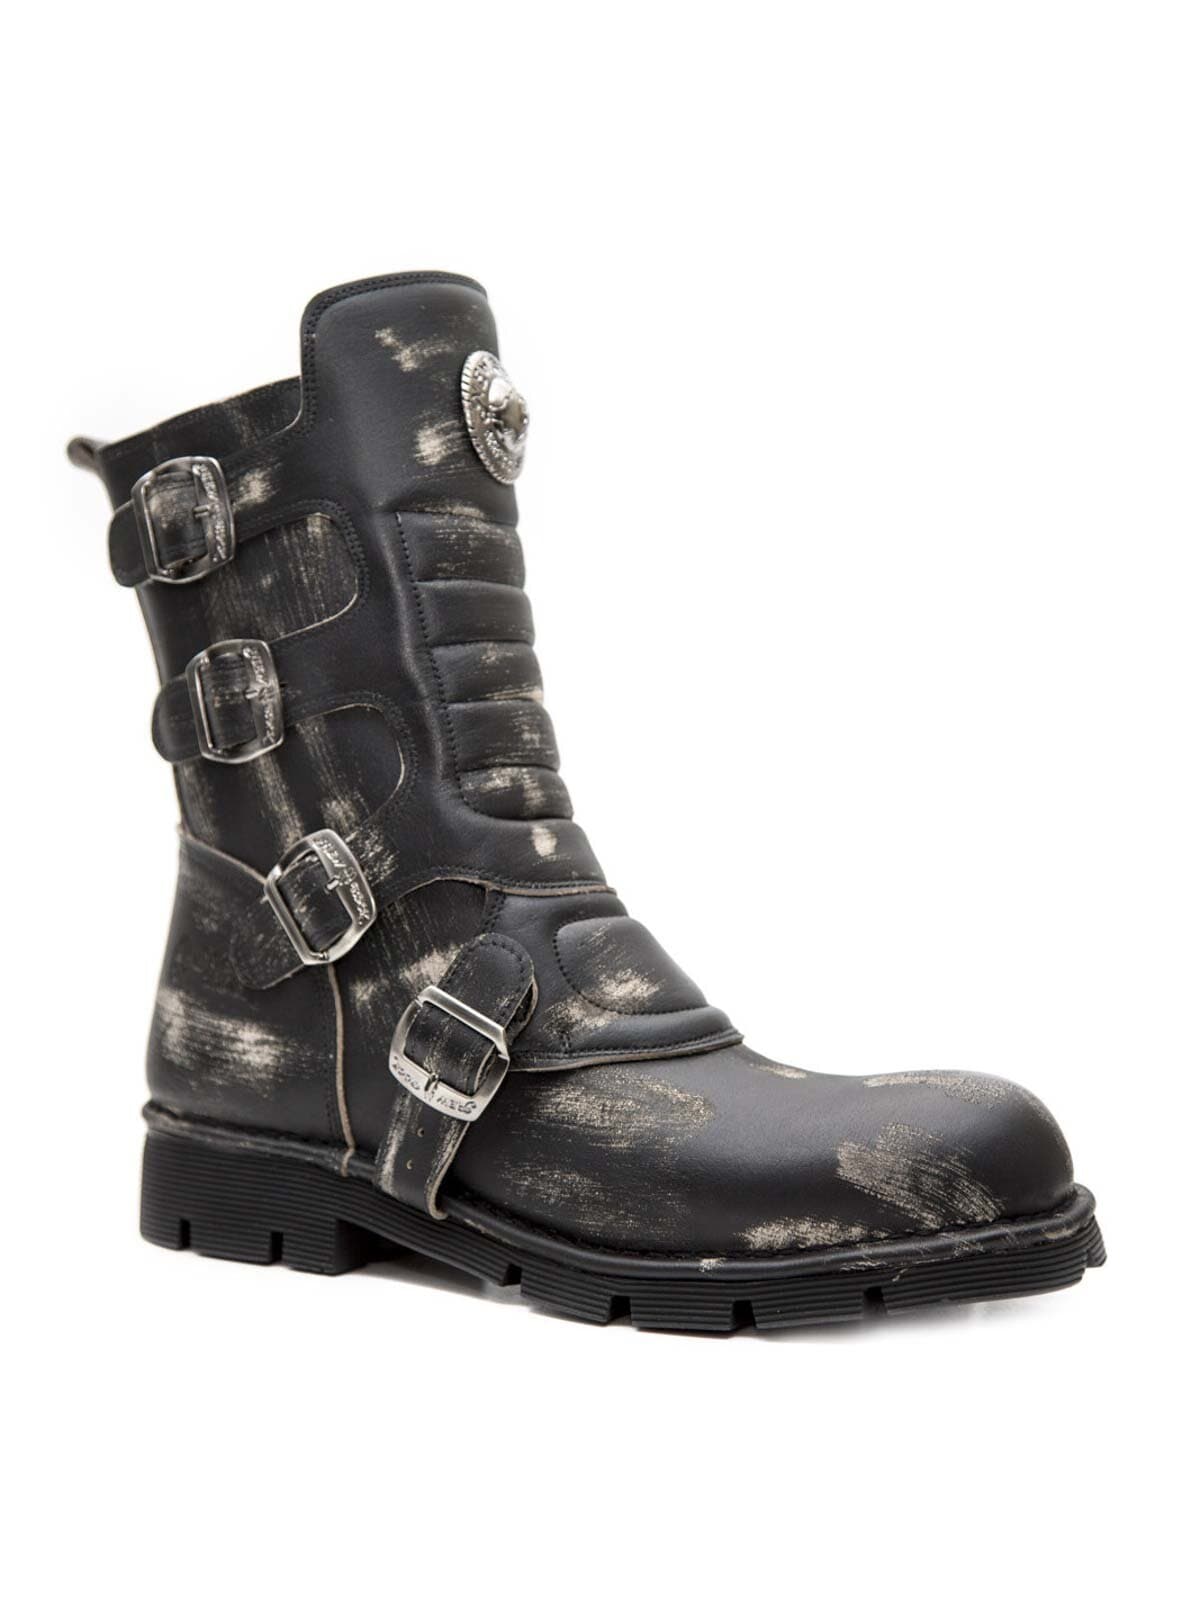 New Rock Boots - Dirty Black